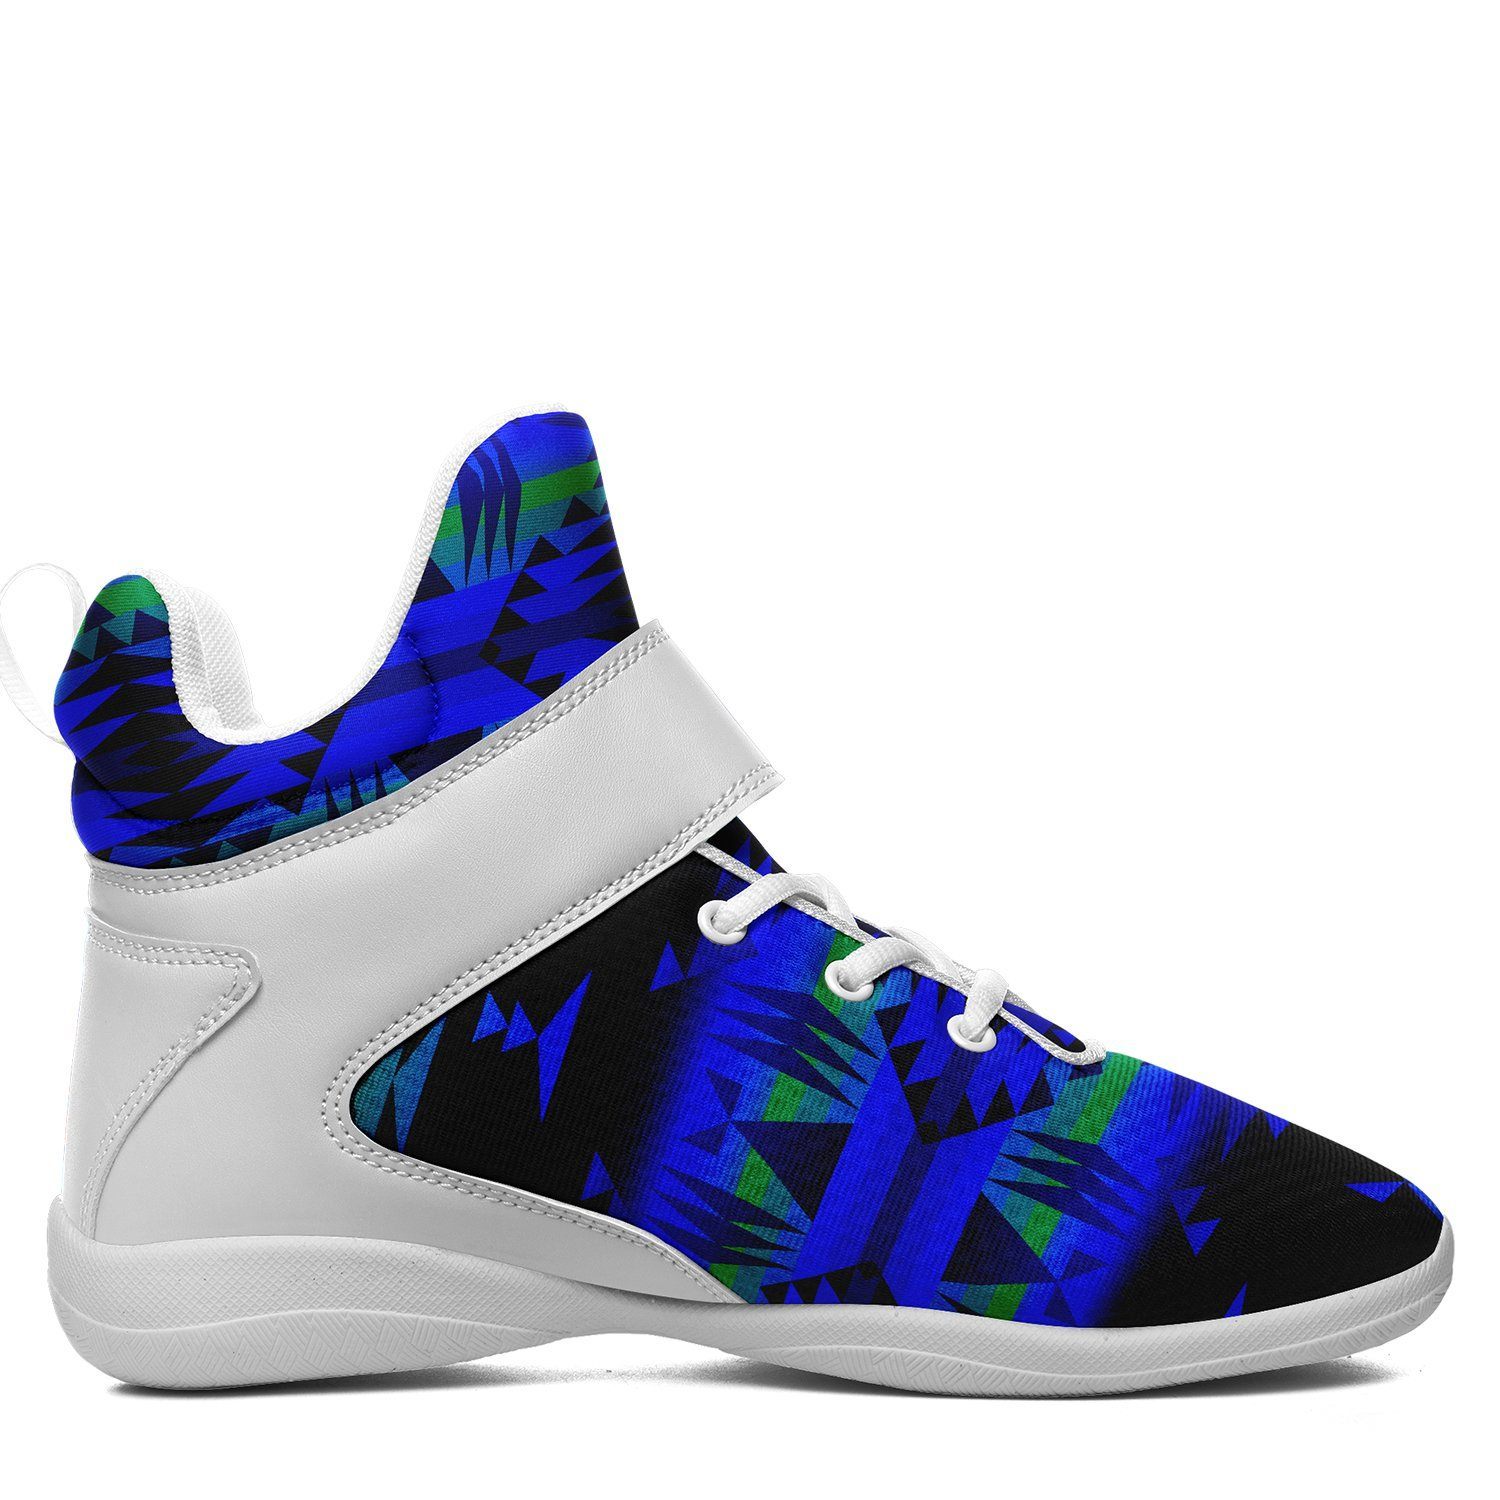 Between the Blue Ridge Mountains Ipottaa Basketball / Sport High Top Shoes - White Sole 49 Dzine 